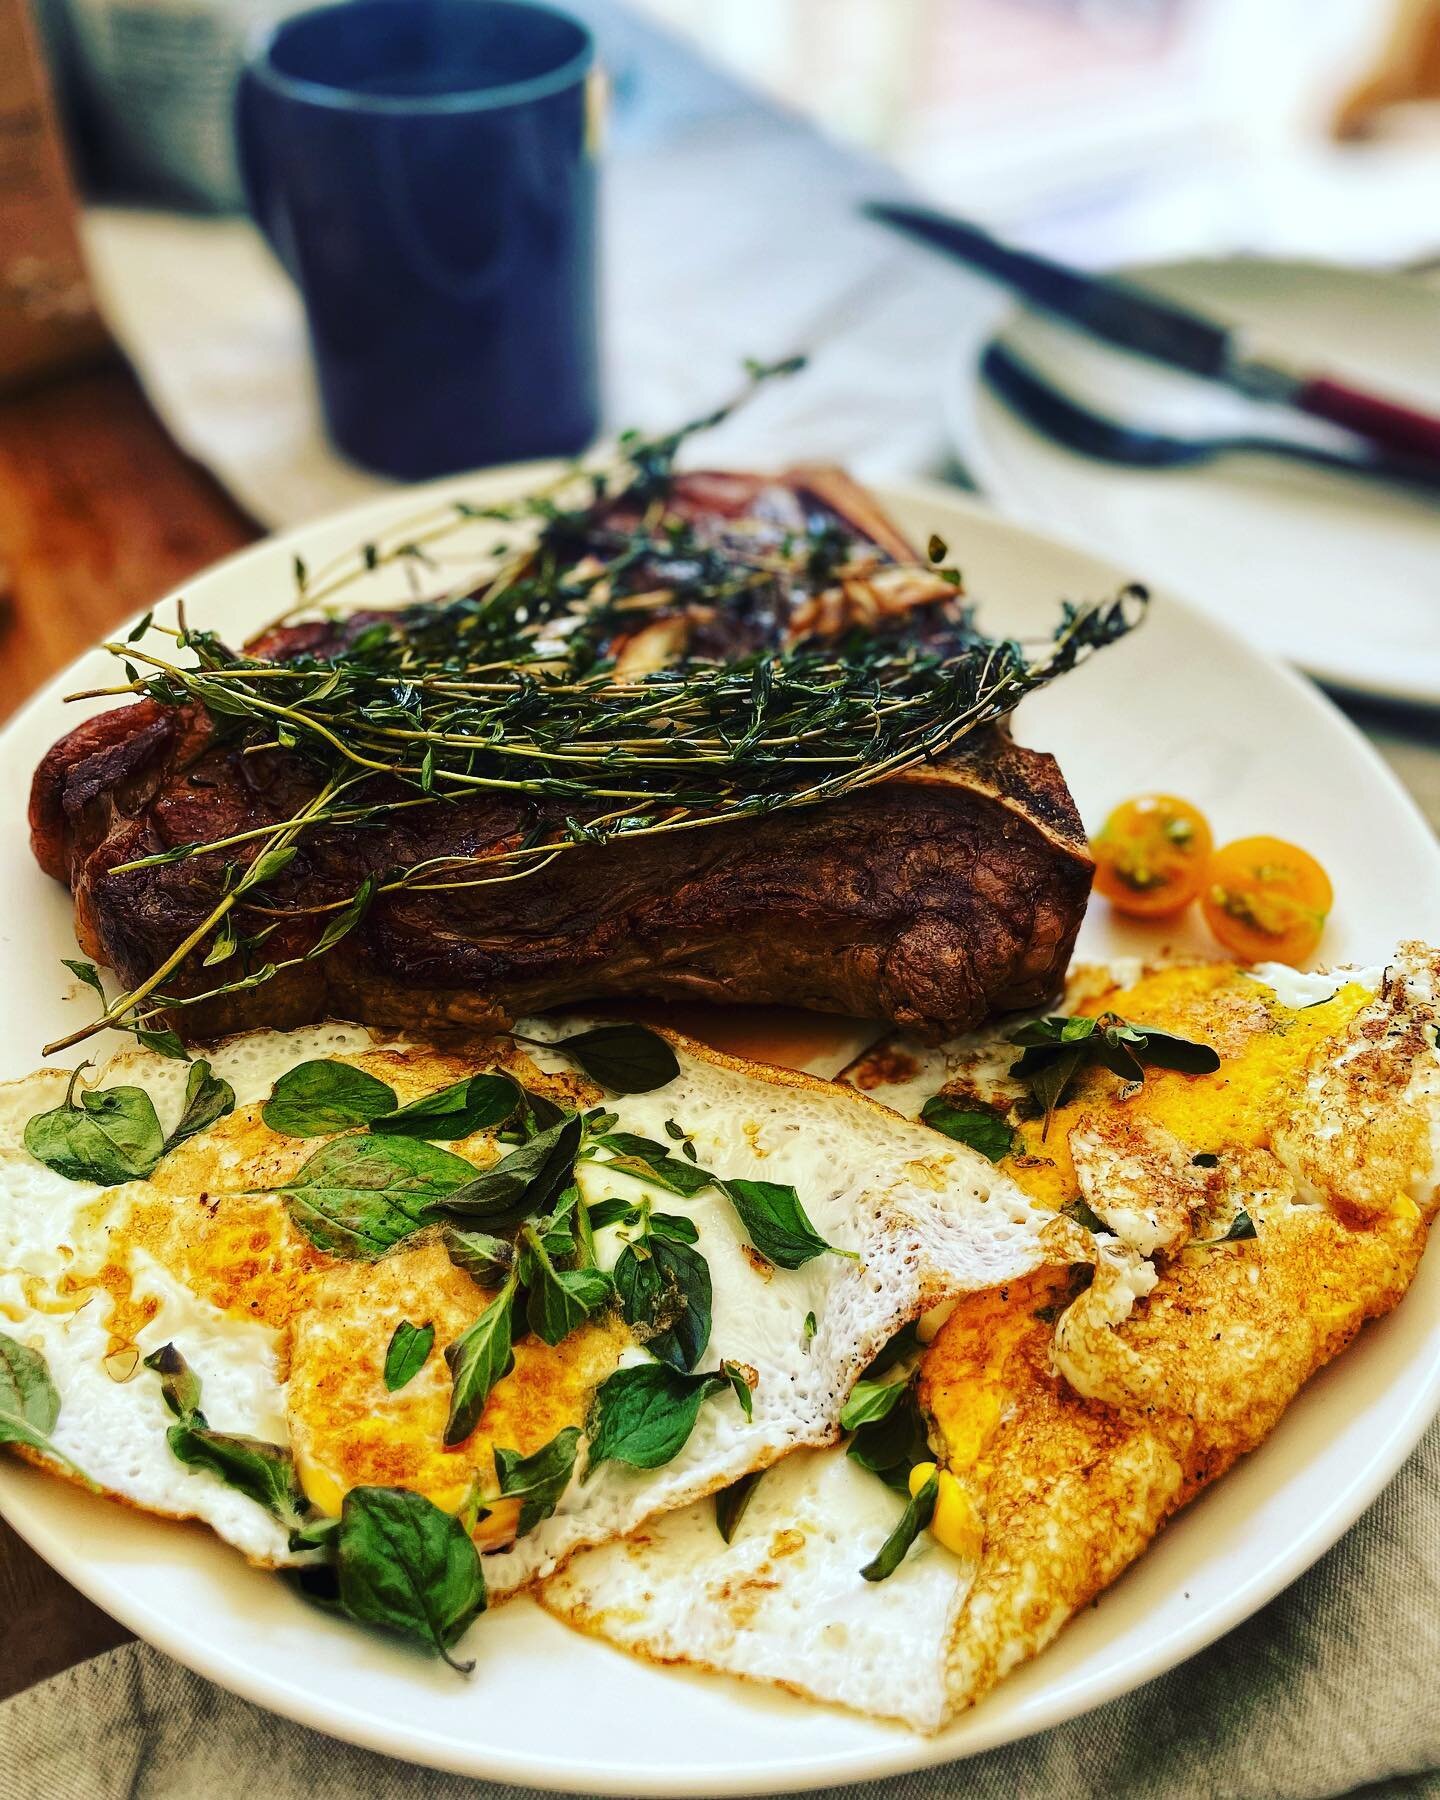 Happy Friday everyone! 

.

A bit of a treat, but we did some pasture raised t-bone steak with local farm fresh eggs this morning, topped with home grown oregano, thyme, and one single golden tomato (the first to ripen this season lol!).

.

We proba